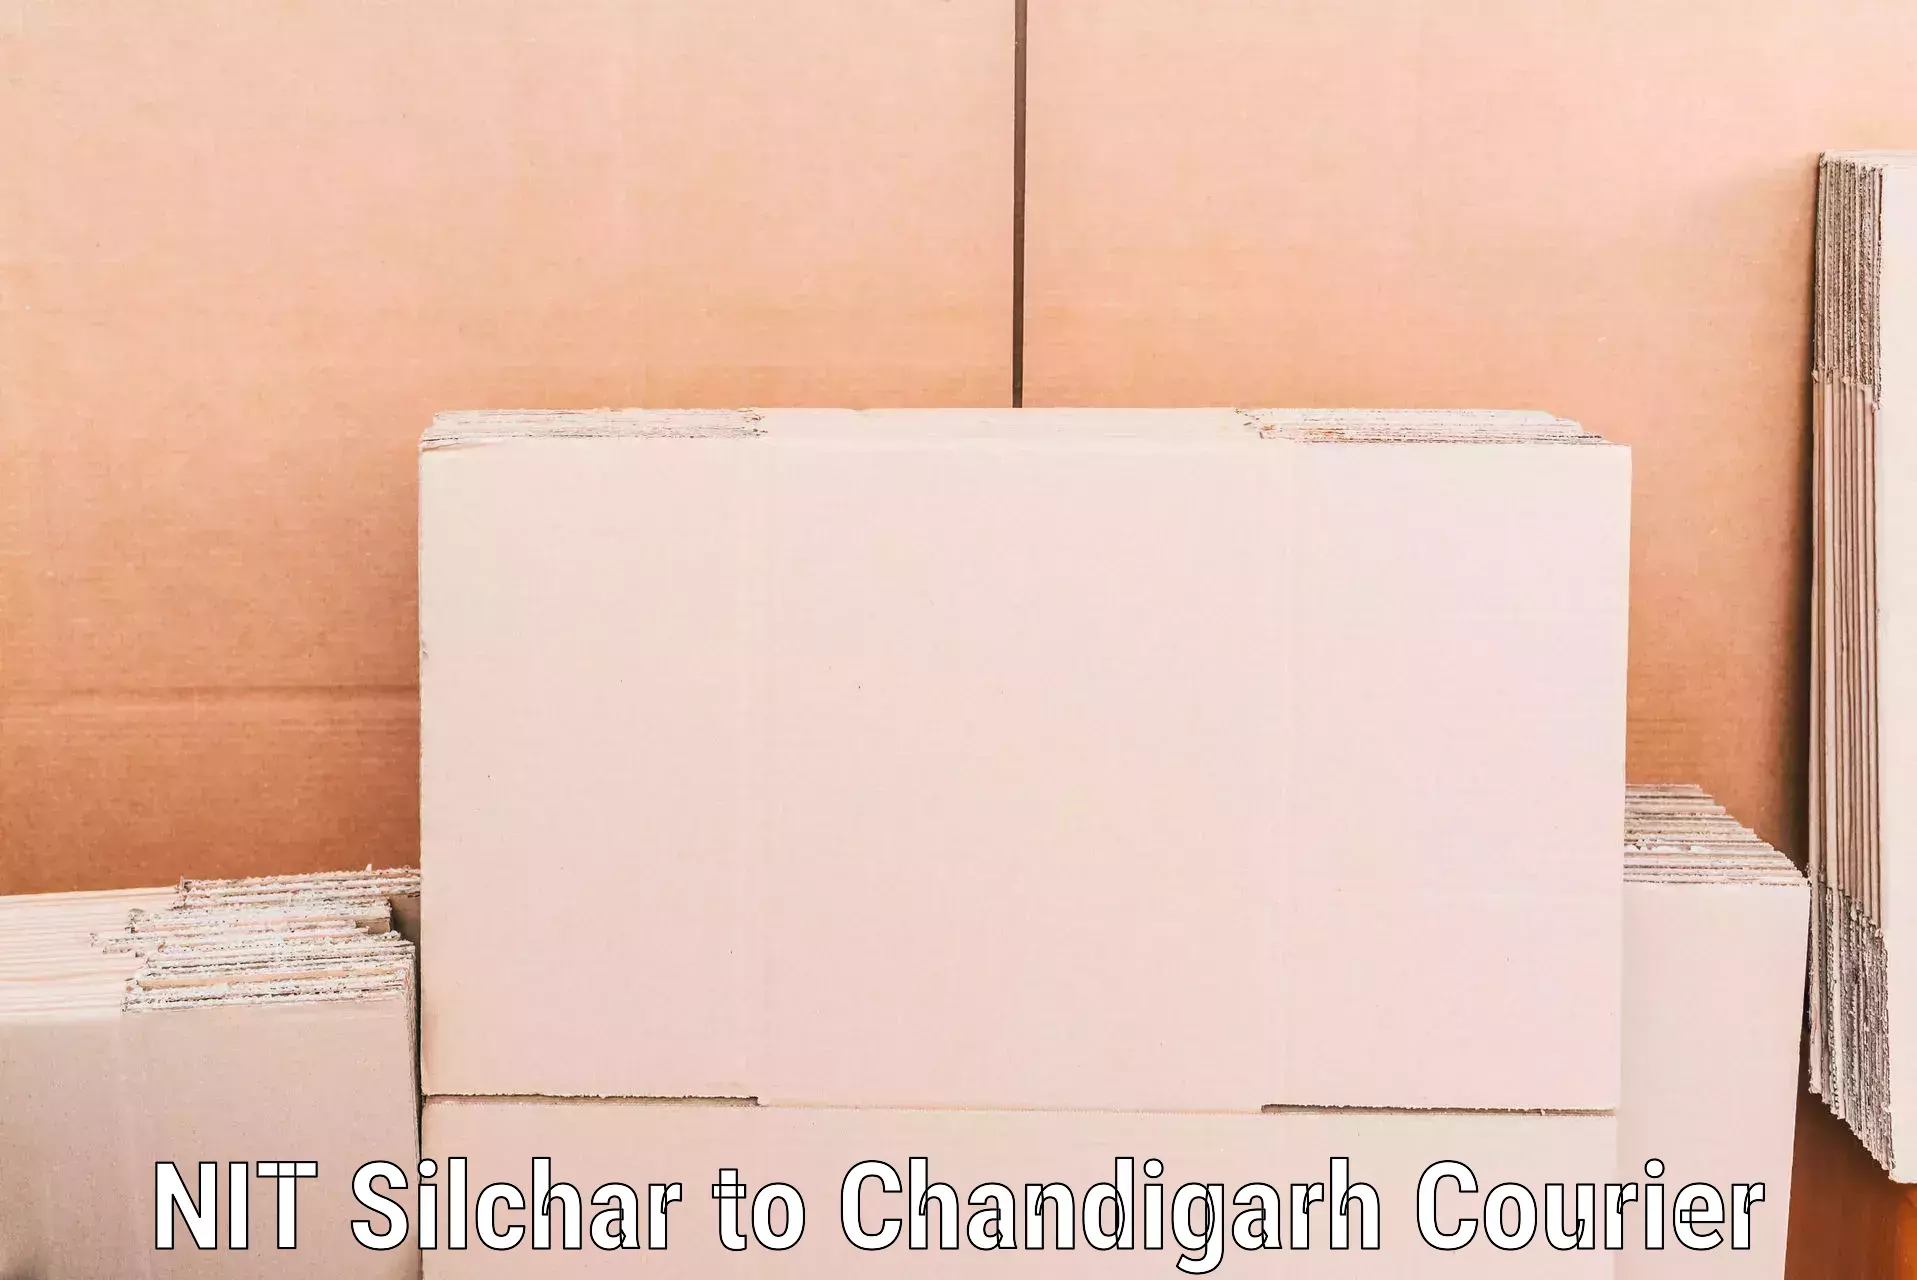 Premium moving services NIT Silchar to Chandigarh